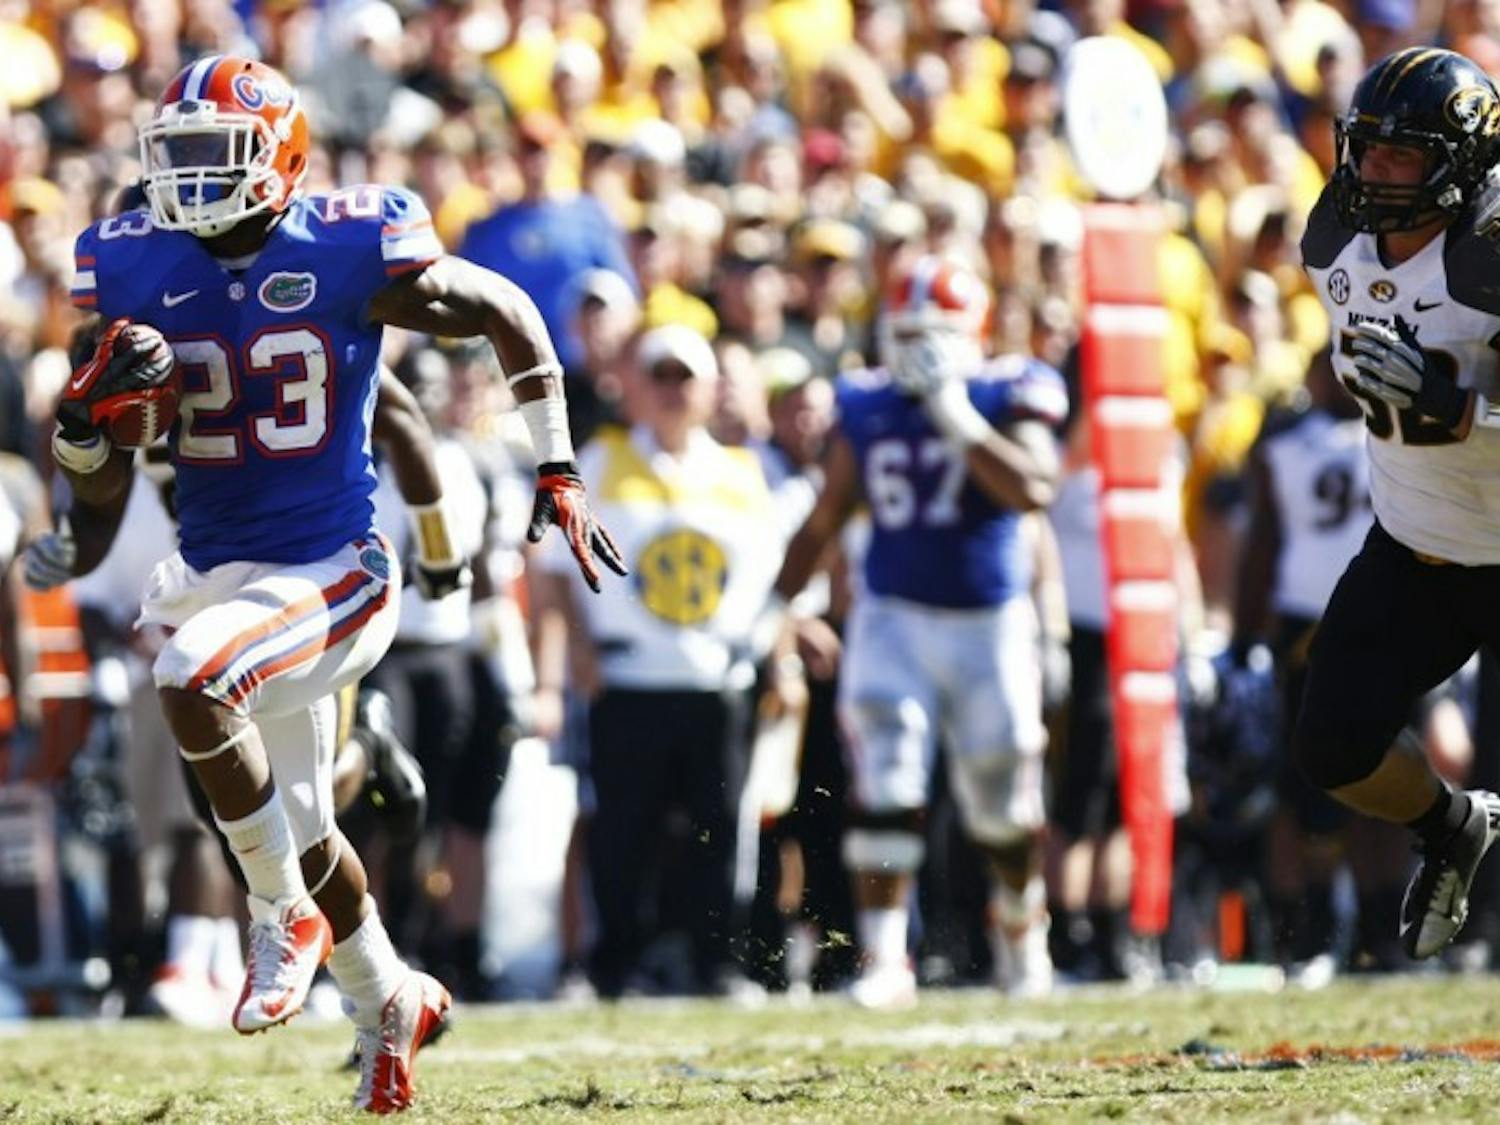 Running back Mike Gillislee (23) runs toward the end zone while being chased by Missouri linebacker Will Ebner (32) during Florida’s 14-7 win on Saturday at Ben Hill Griffin Stadium.
